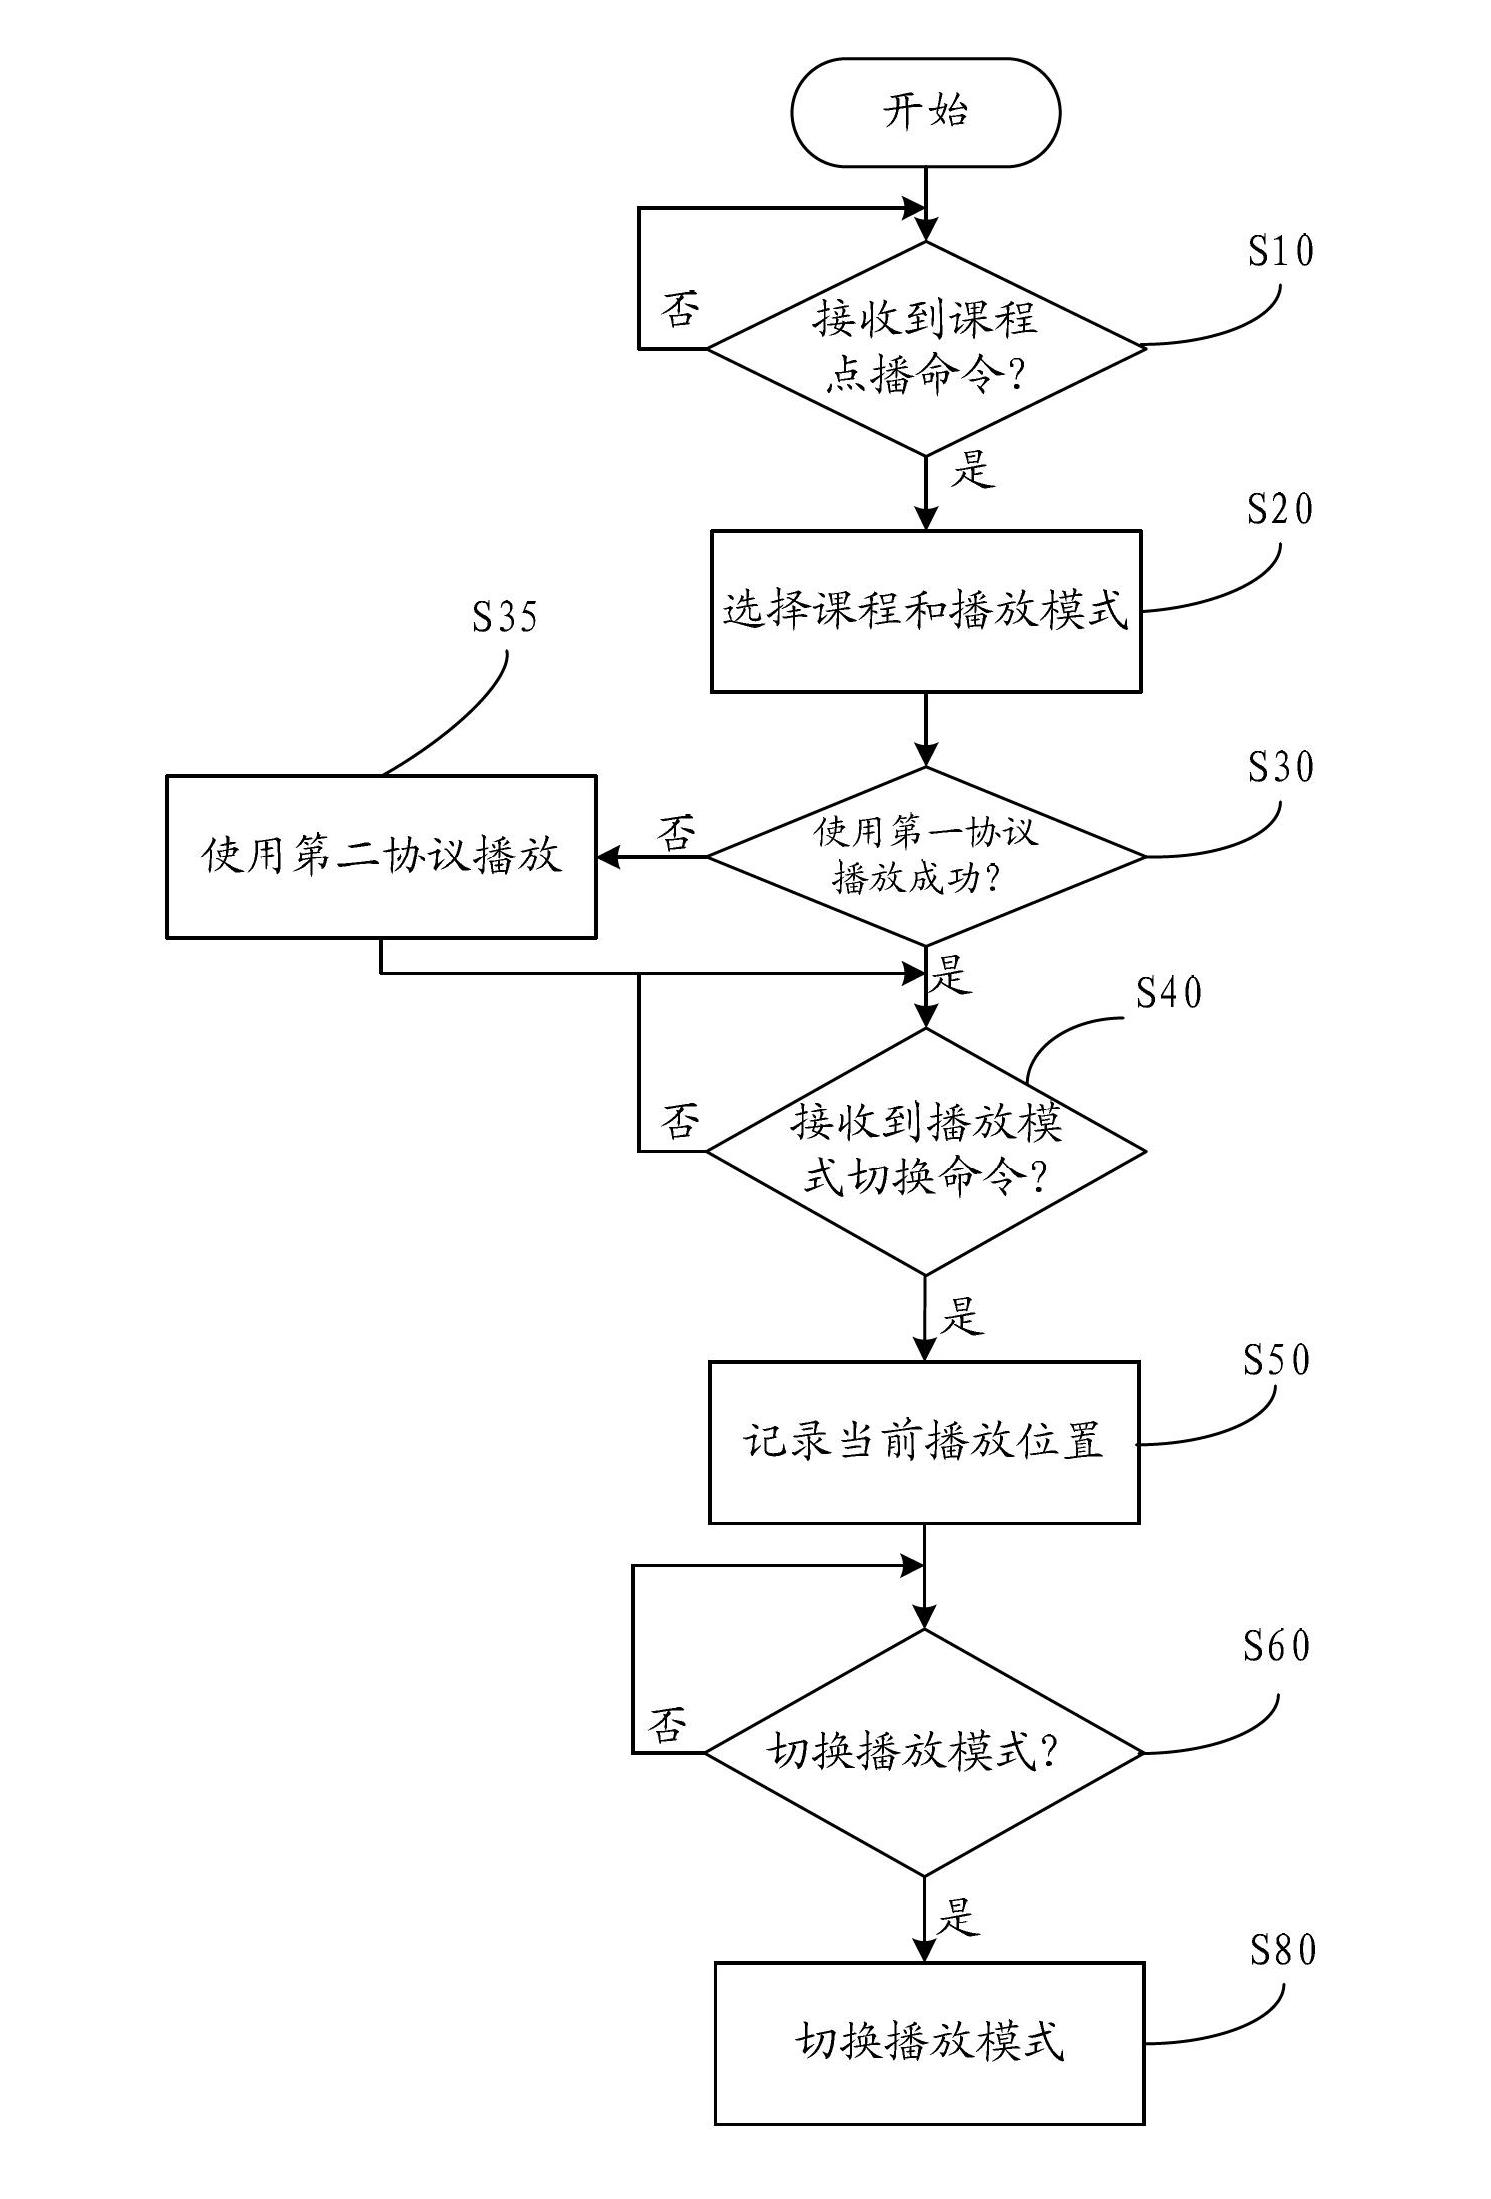 Mobile video playing system and method for remote instruction